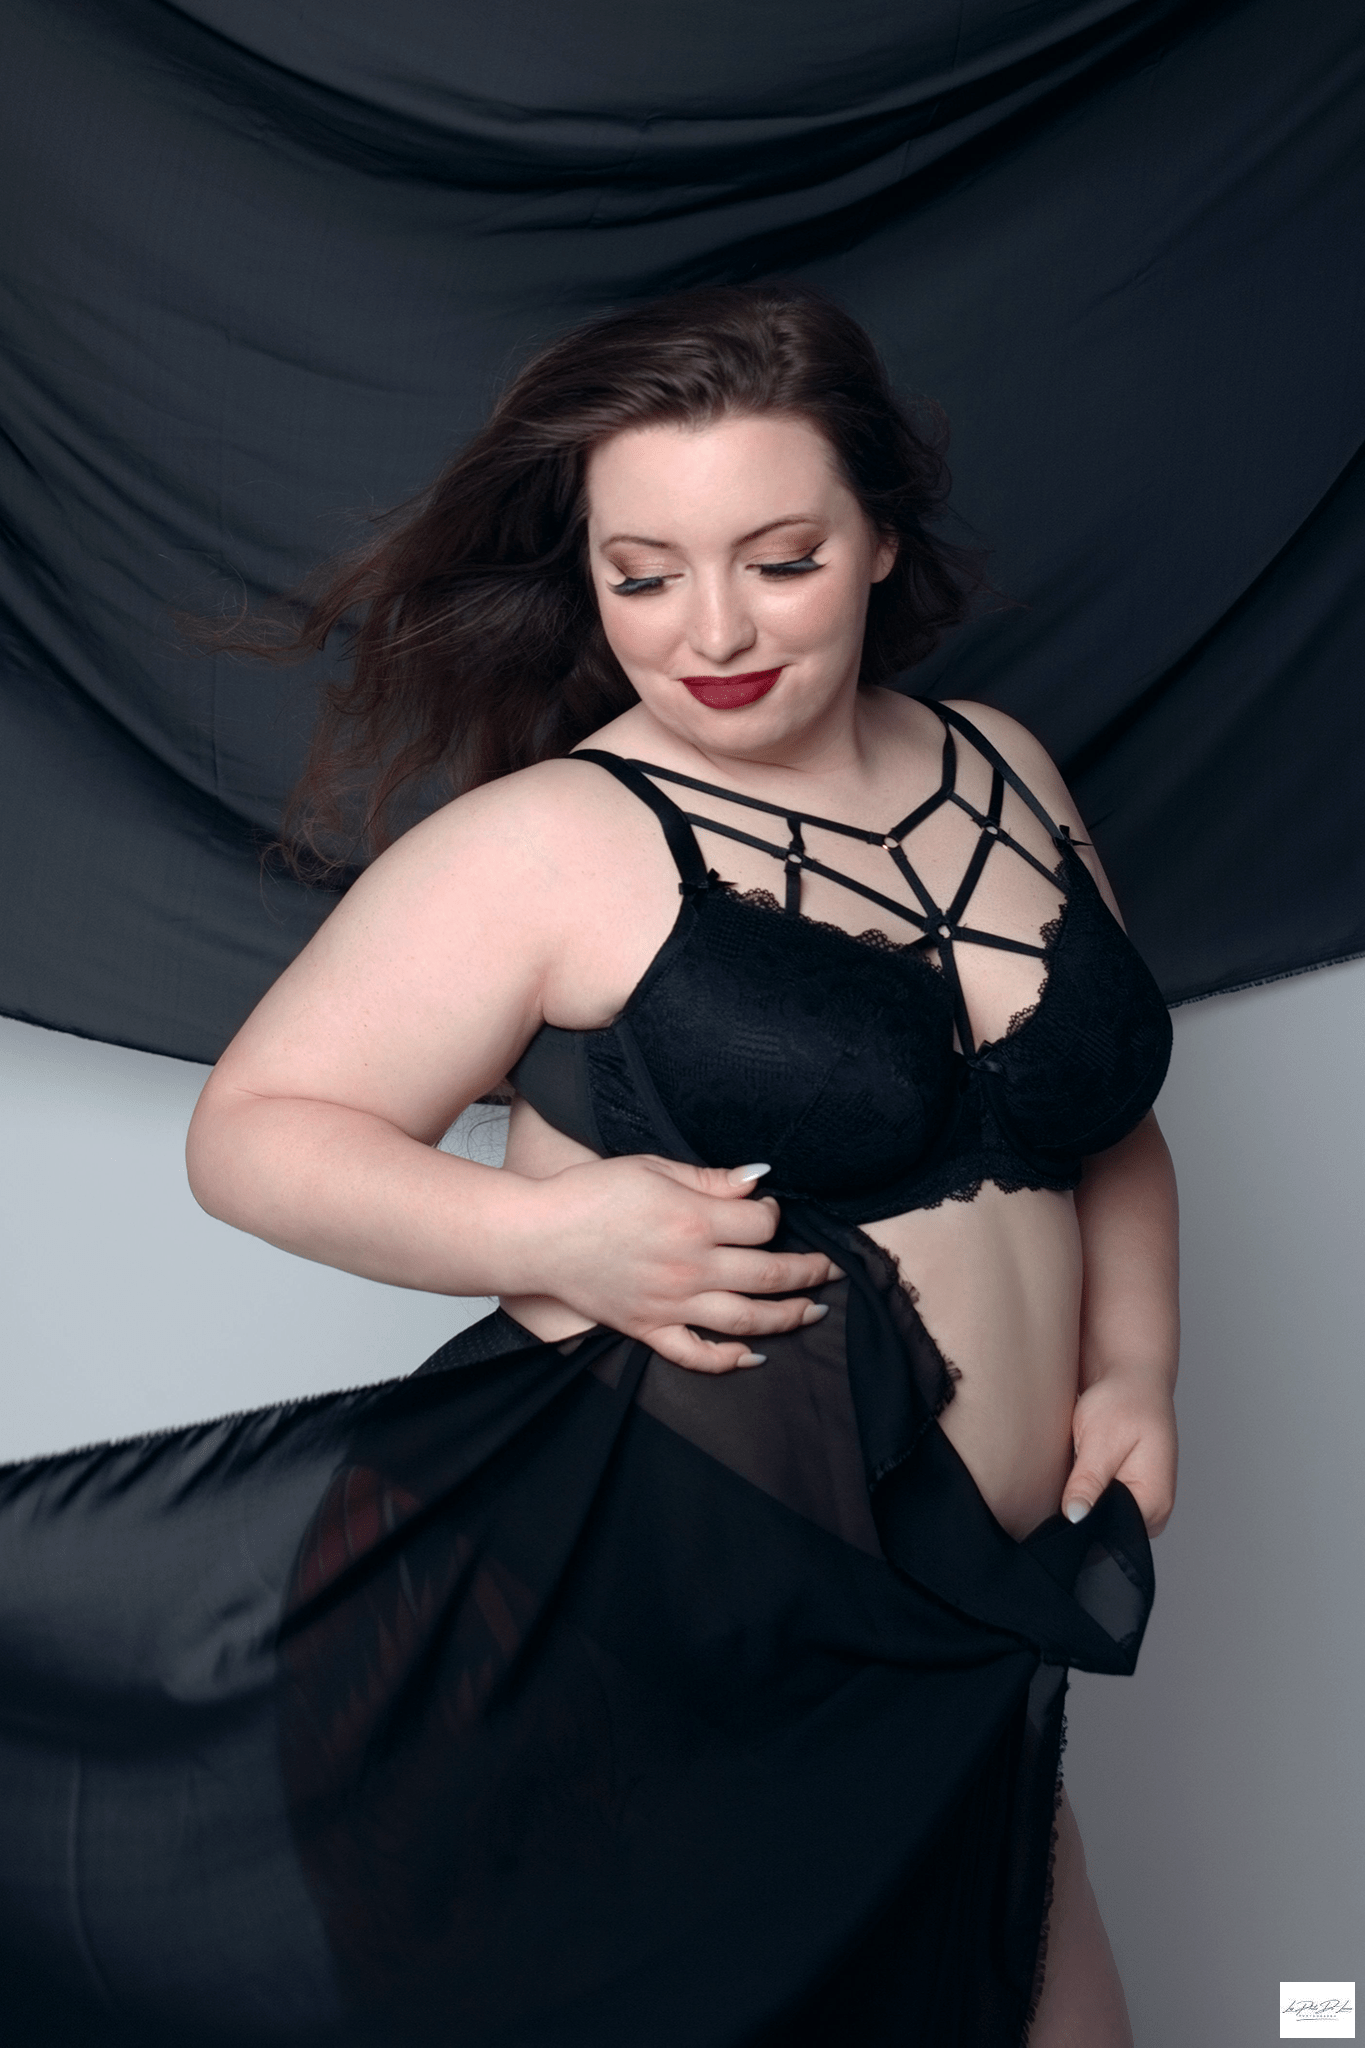 Woman in black bra and Black Sheer fabric posing with red lipstick in her  Boudoir Session